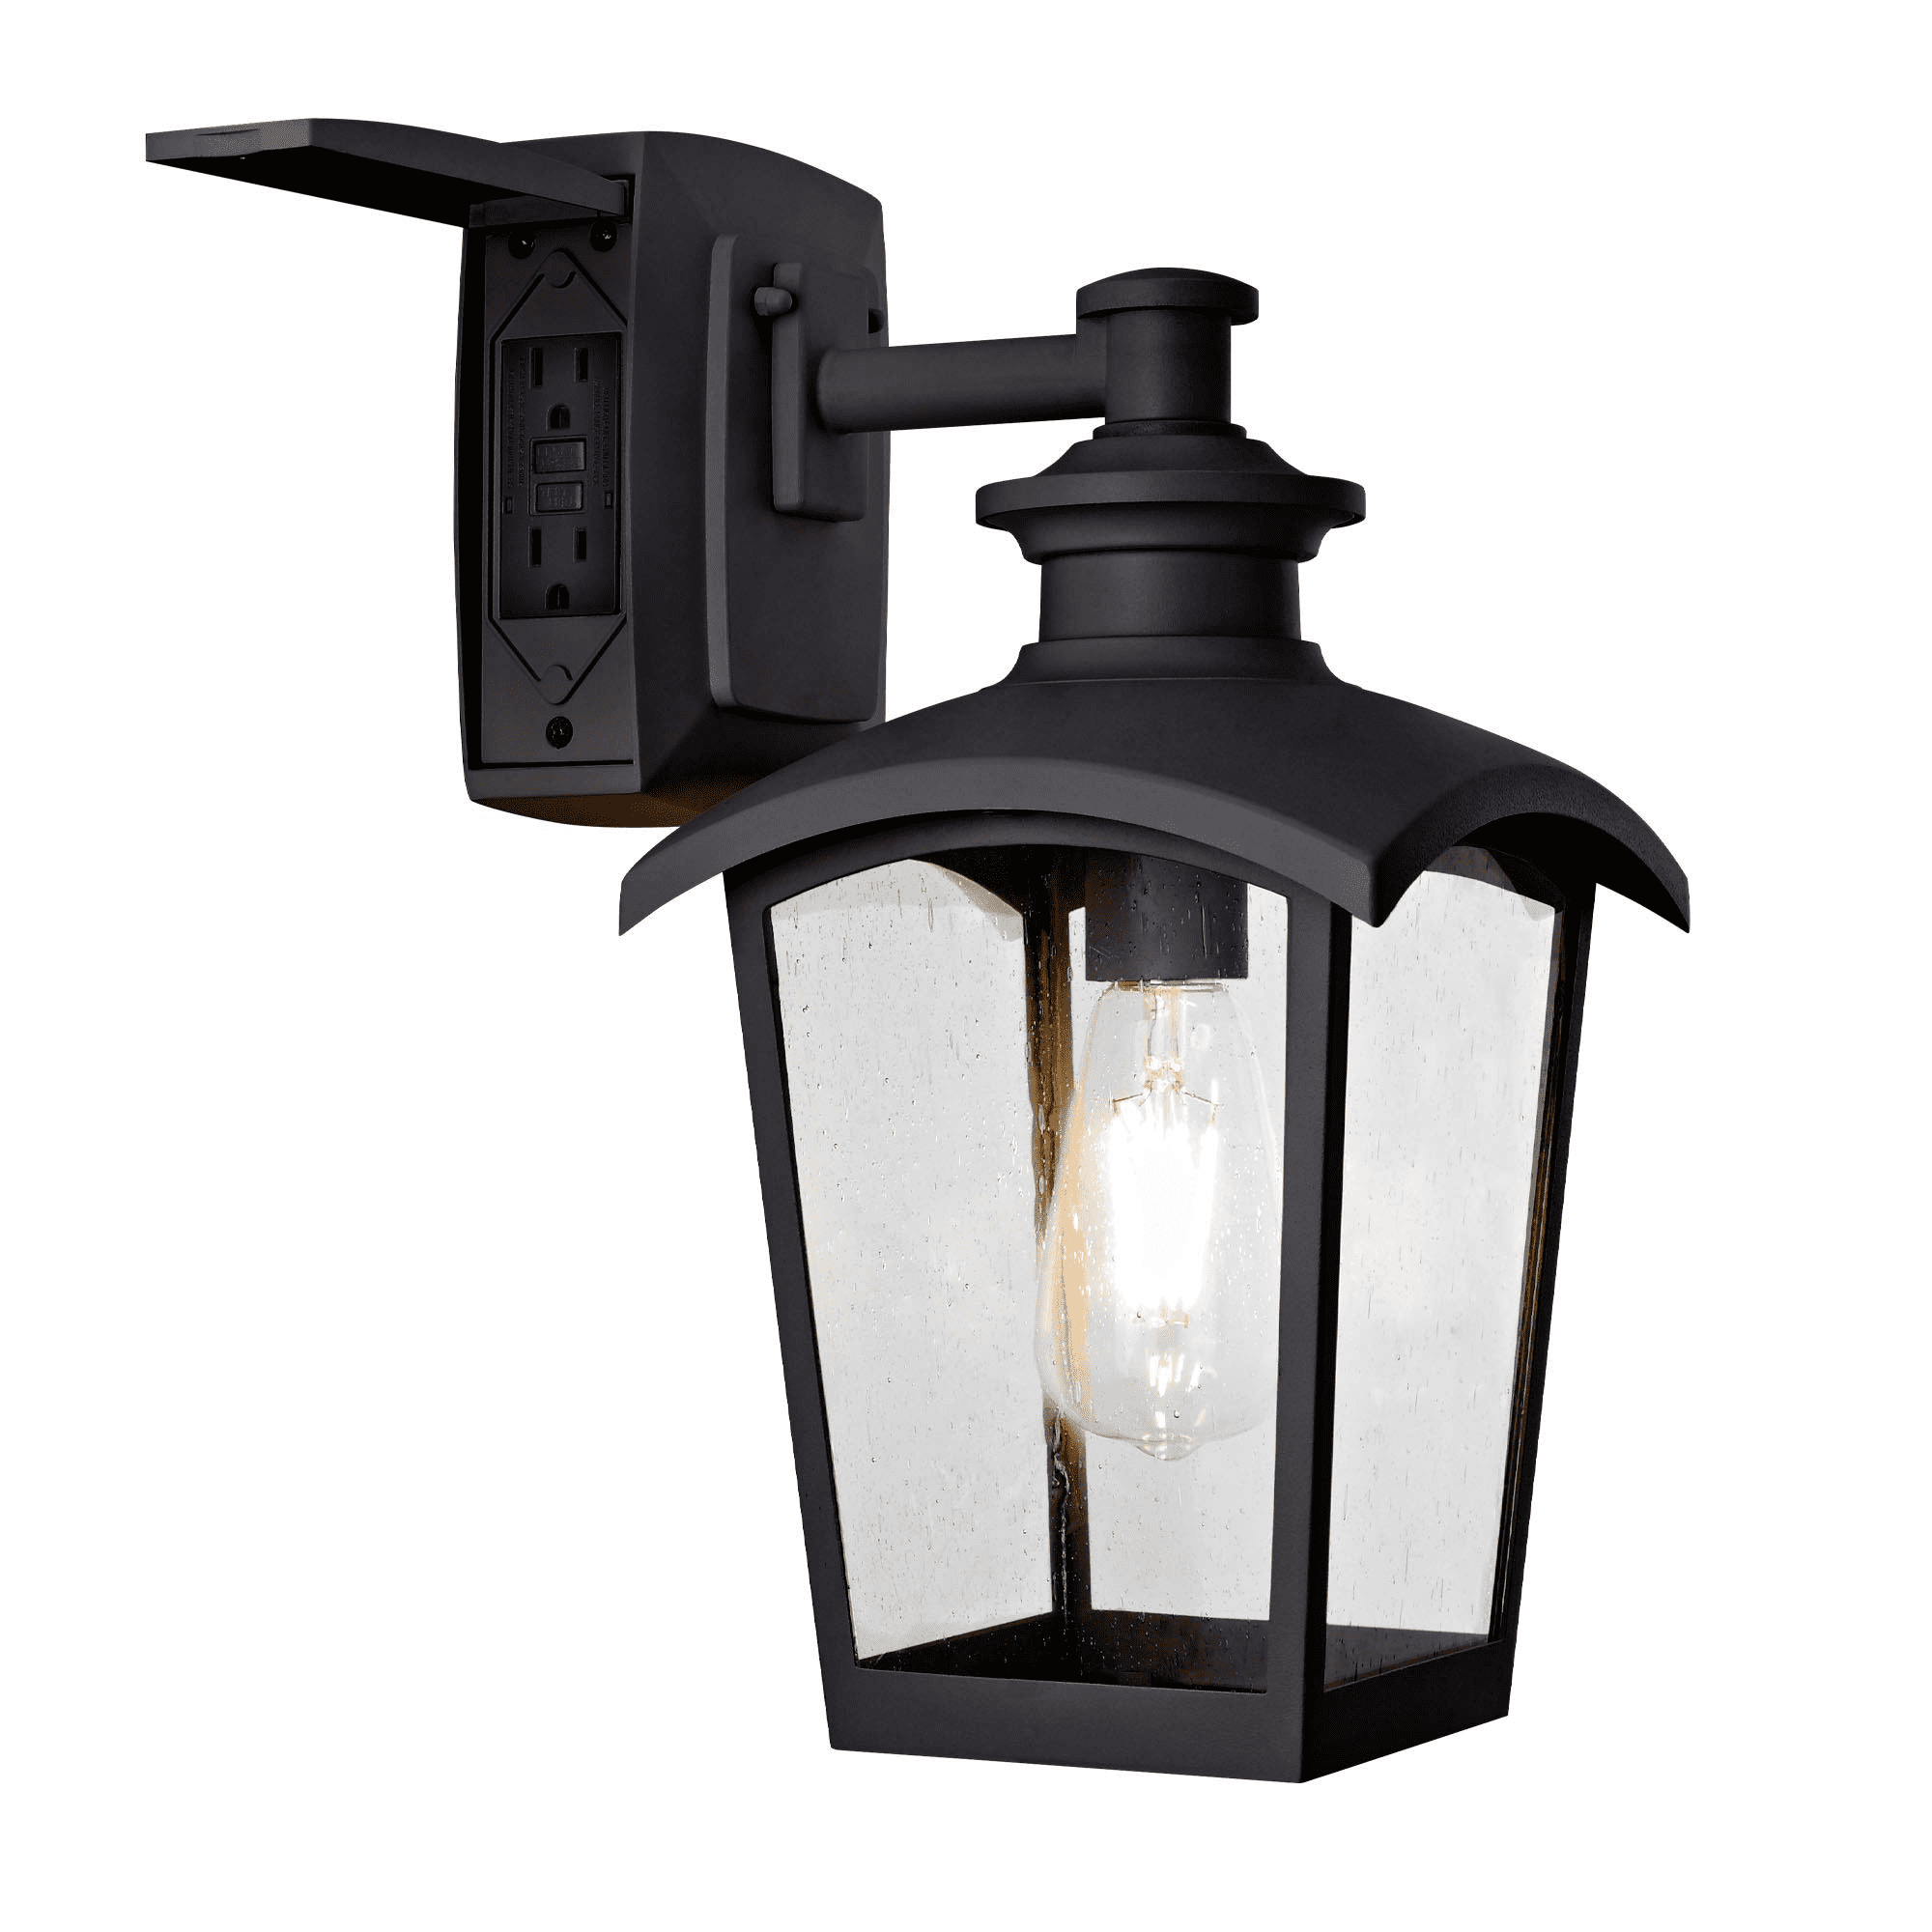 31703 Spence 1-Light Outdoor Wall Lantern with Seeded Glass and Built-in  GFCI Outlet, Black